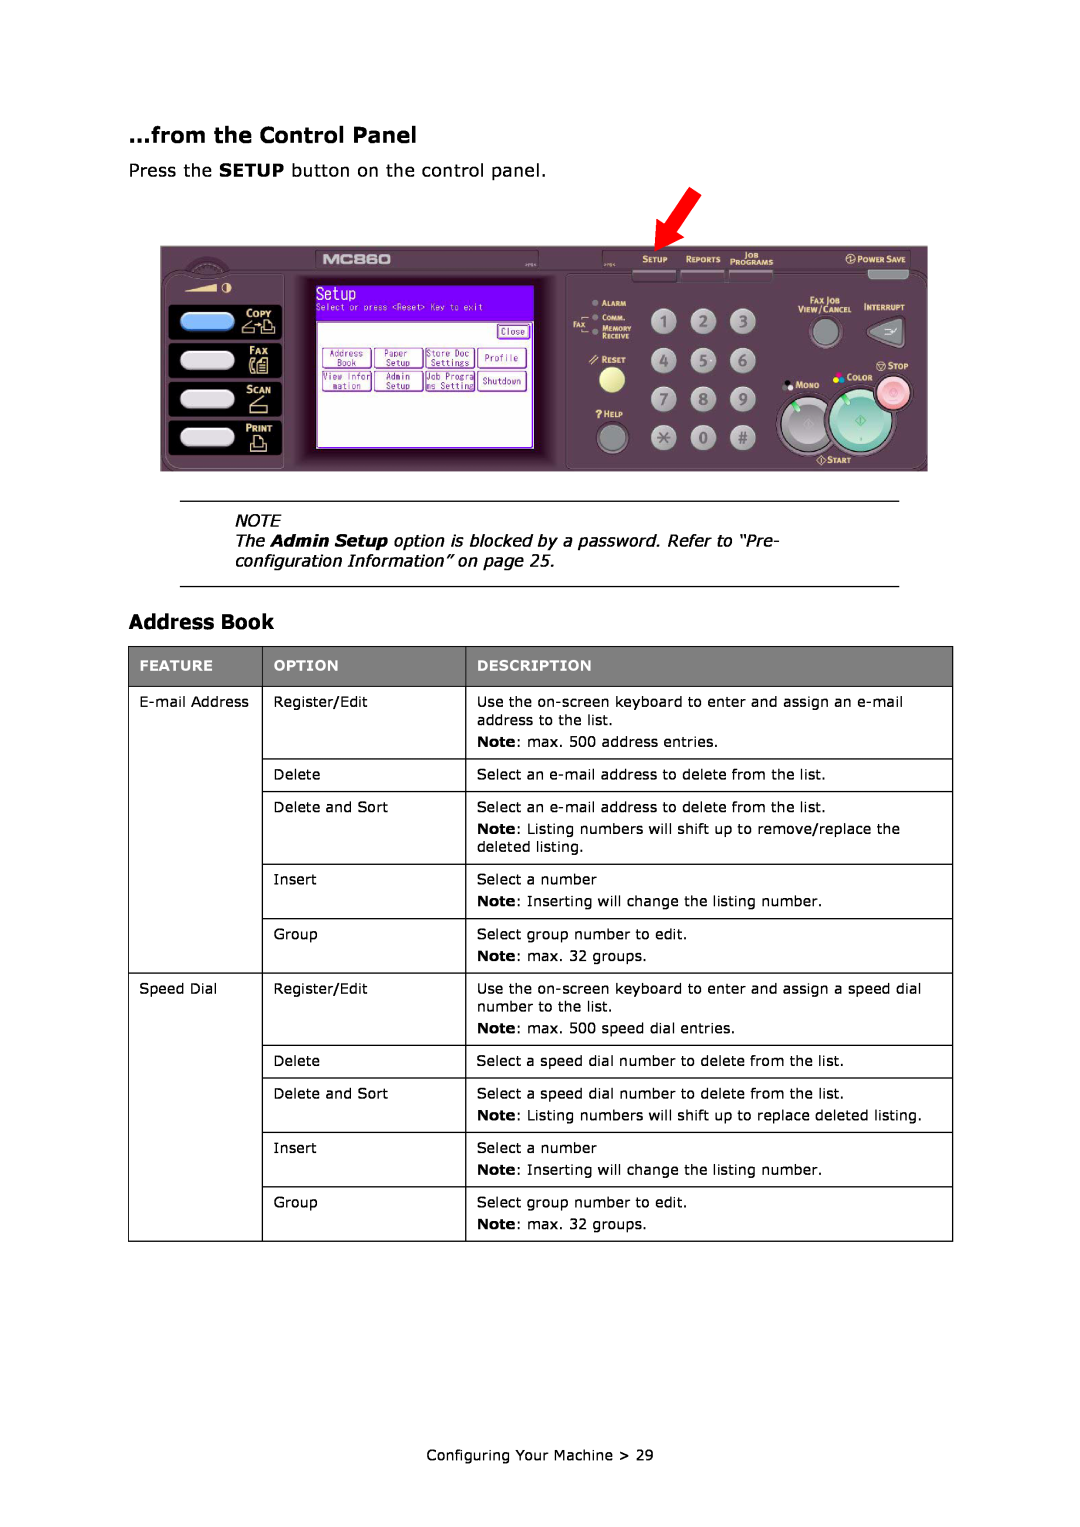 Oki MC860n MFP manual from the Control Panel, Address Book, Feature, Option, Description 